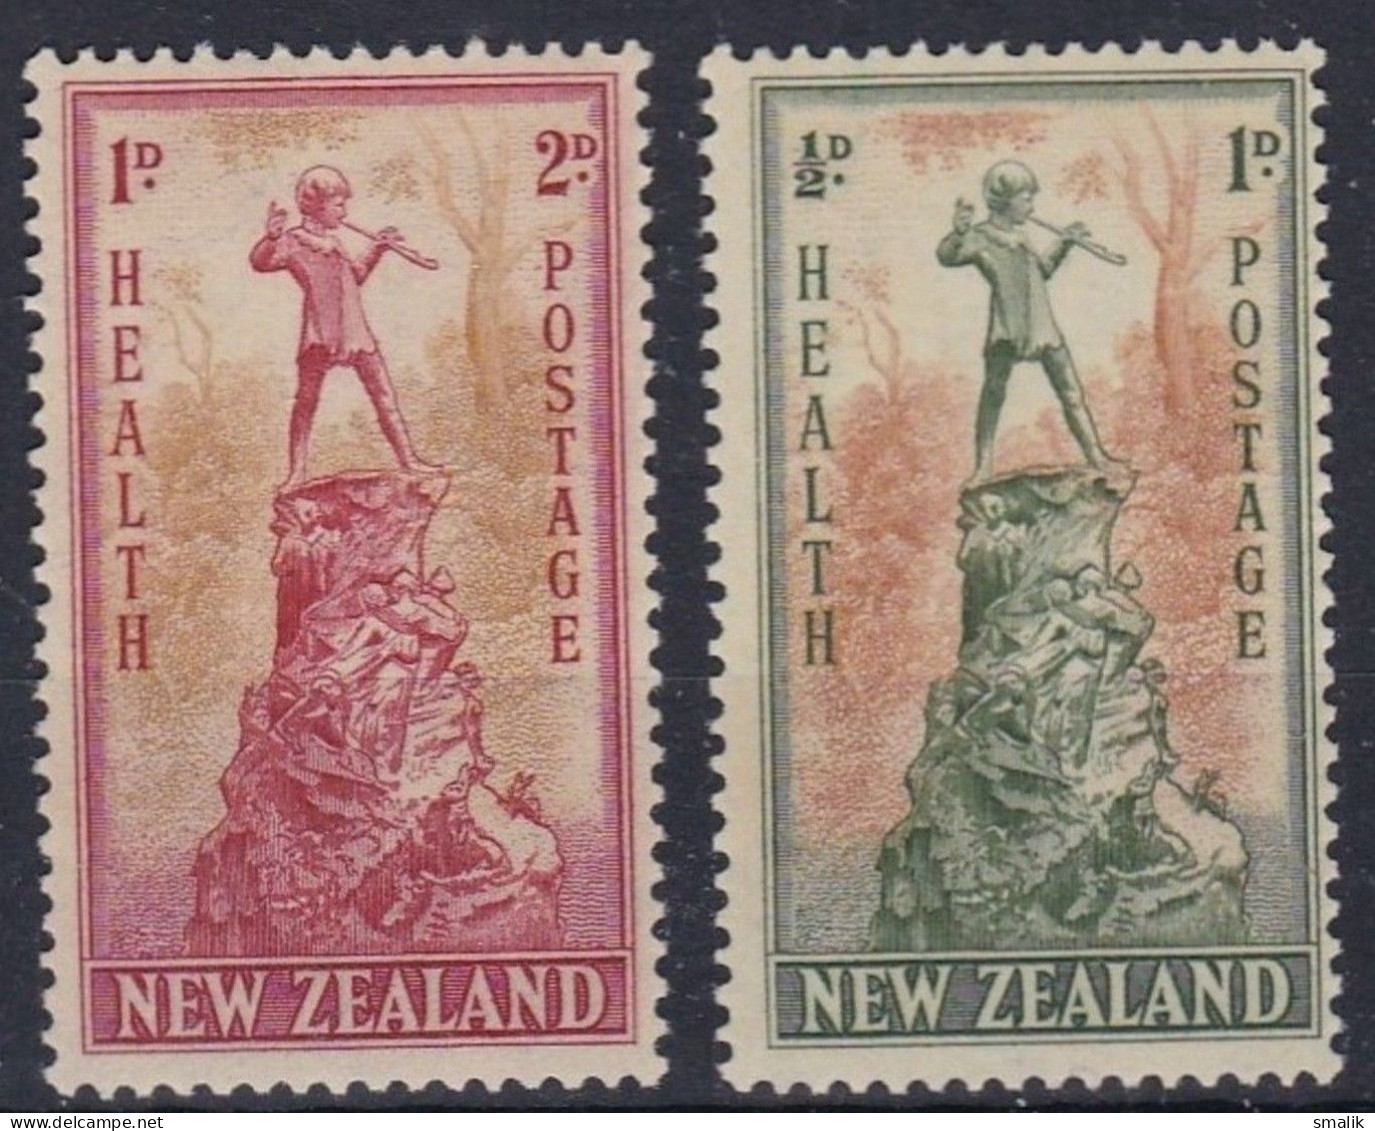 NEW ZEALAND 1945 - Health Surcharge, Peter Pan, Complete Set Of 2v. MNH - Neufs